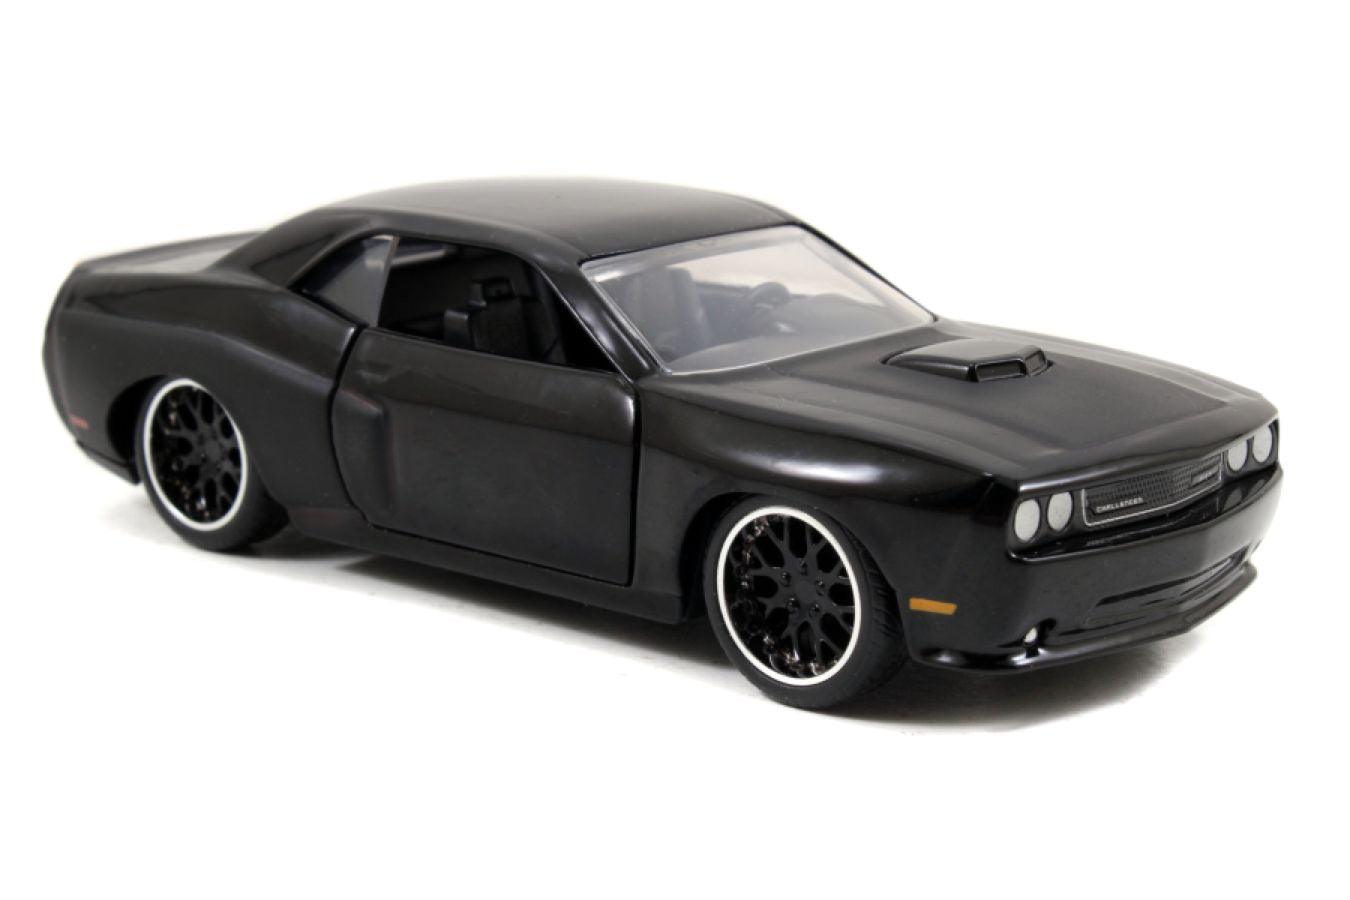 JAD97384 Fast and Furious - 2012 Dodge Challenger SRT8 1:32 Scale Hollywood Ride - Jada Toys - Titan Pop Culture